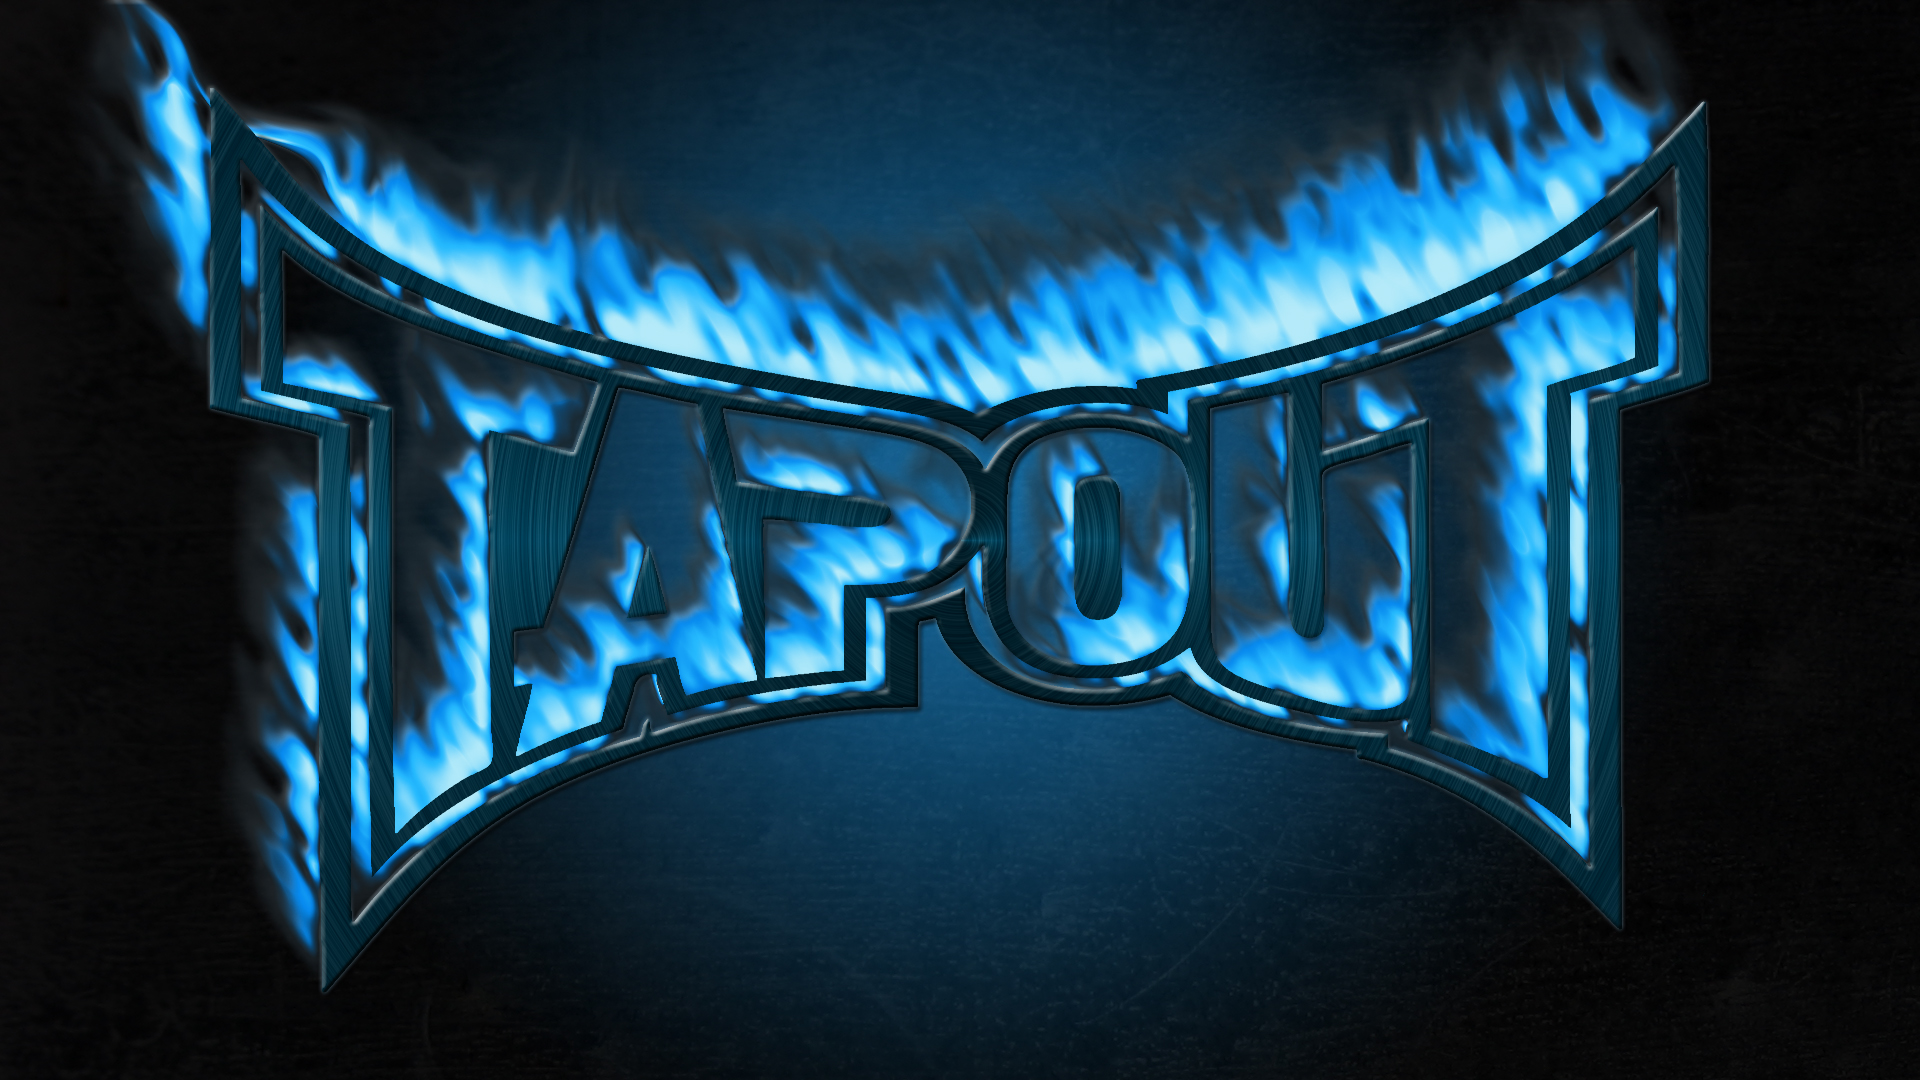 Tapout Blue Grunge Background Wide Blue Flames